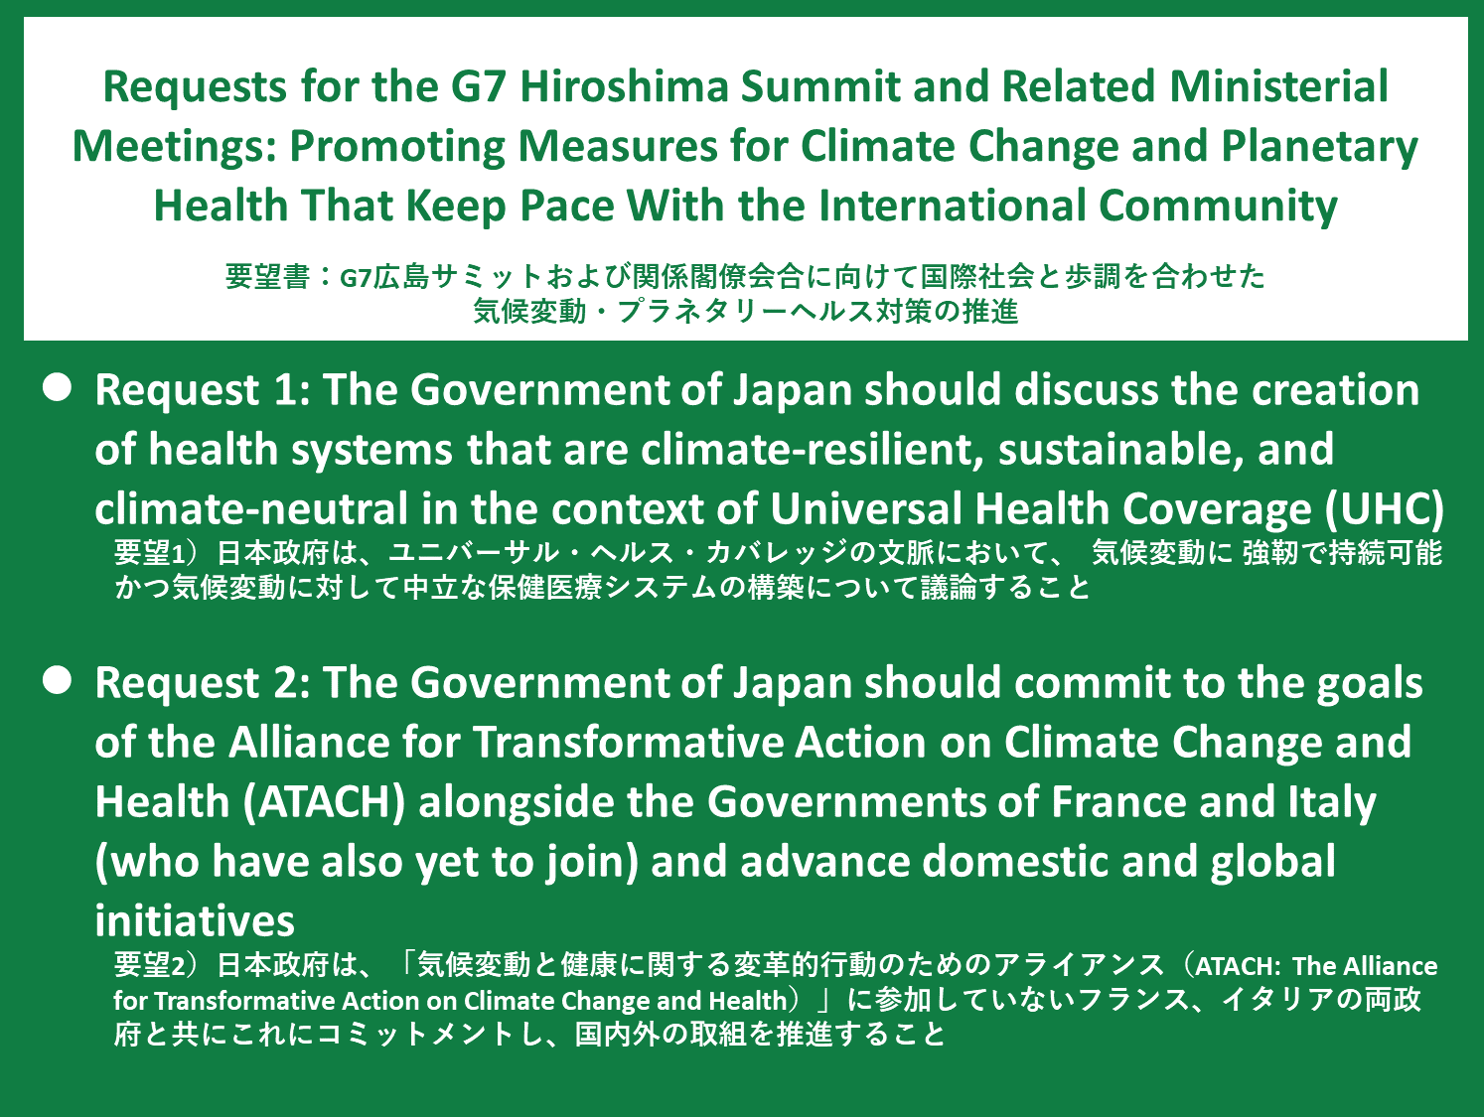 [Policy Recommendations] Requests for the G7 Hiroshima Summit and Related Ministerial Meetings: Promoting Measures for Climate Change and Planetary Health That Keep Pace With the International Community (December 19, 2022)